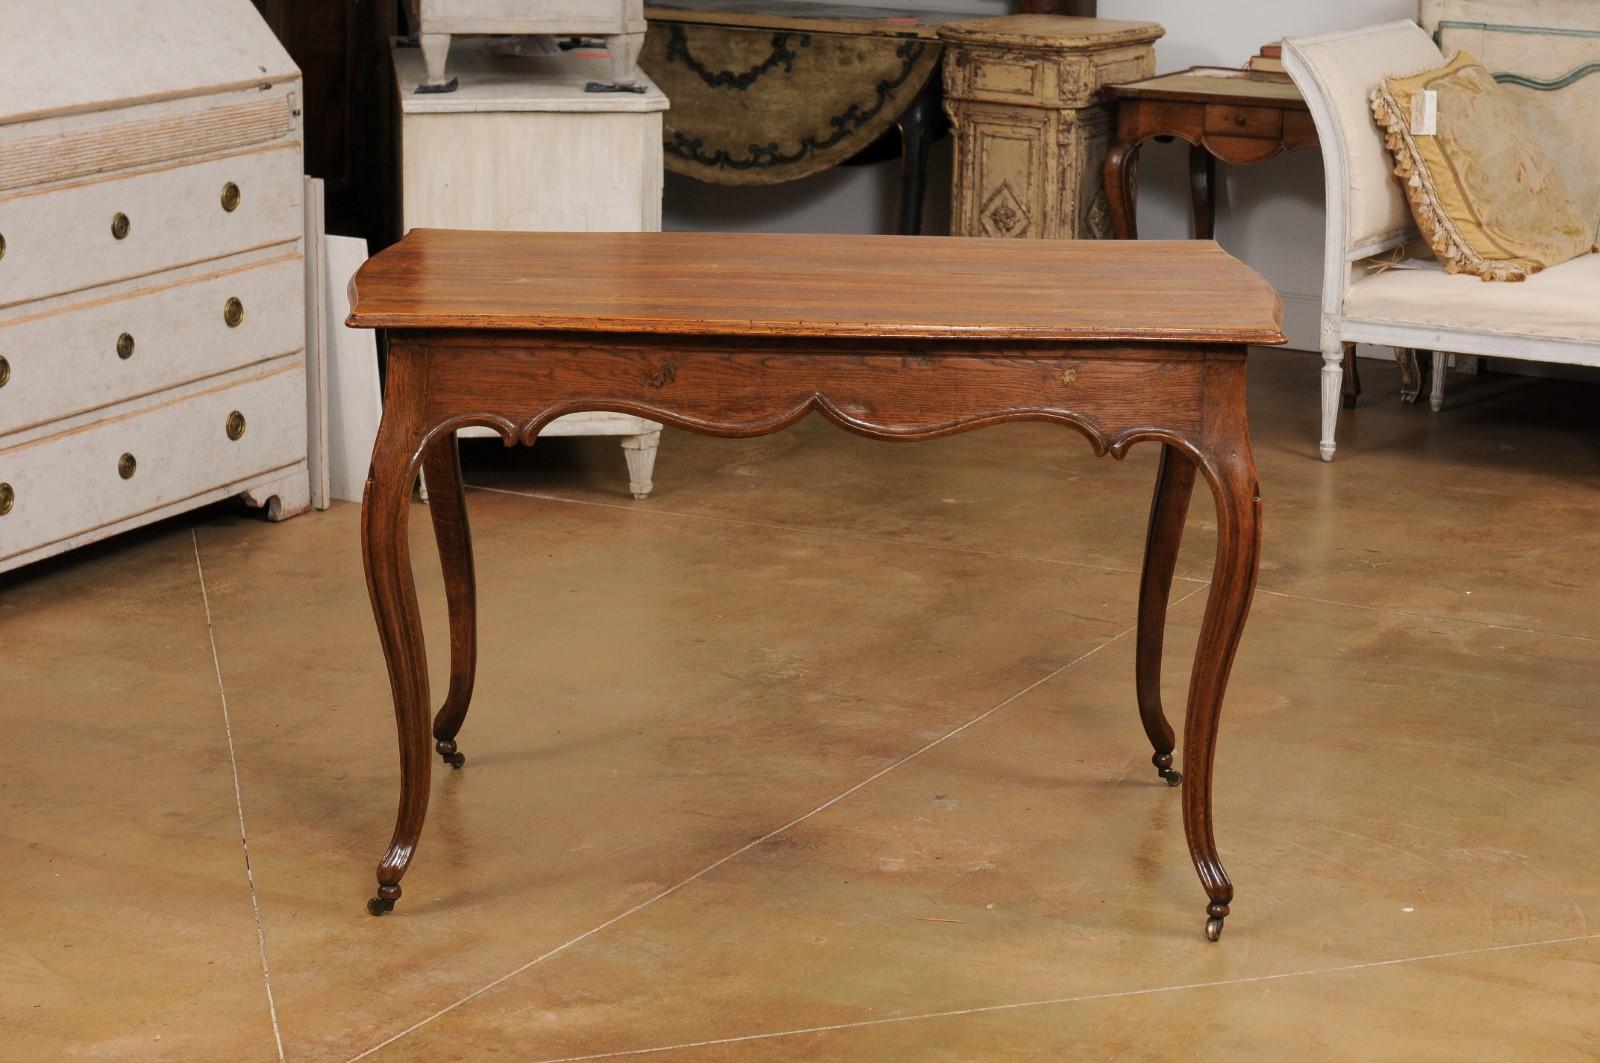 Italian Rococo Early 19th Century Oak Table with Carved Apron and Cabriole Legs For Sale 7